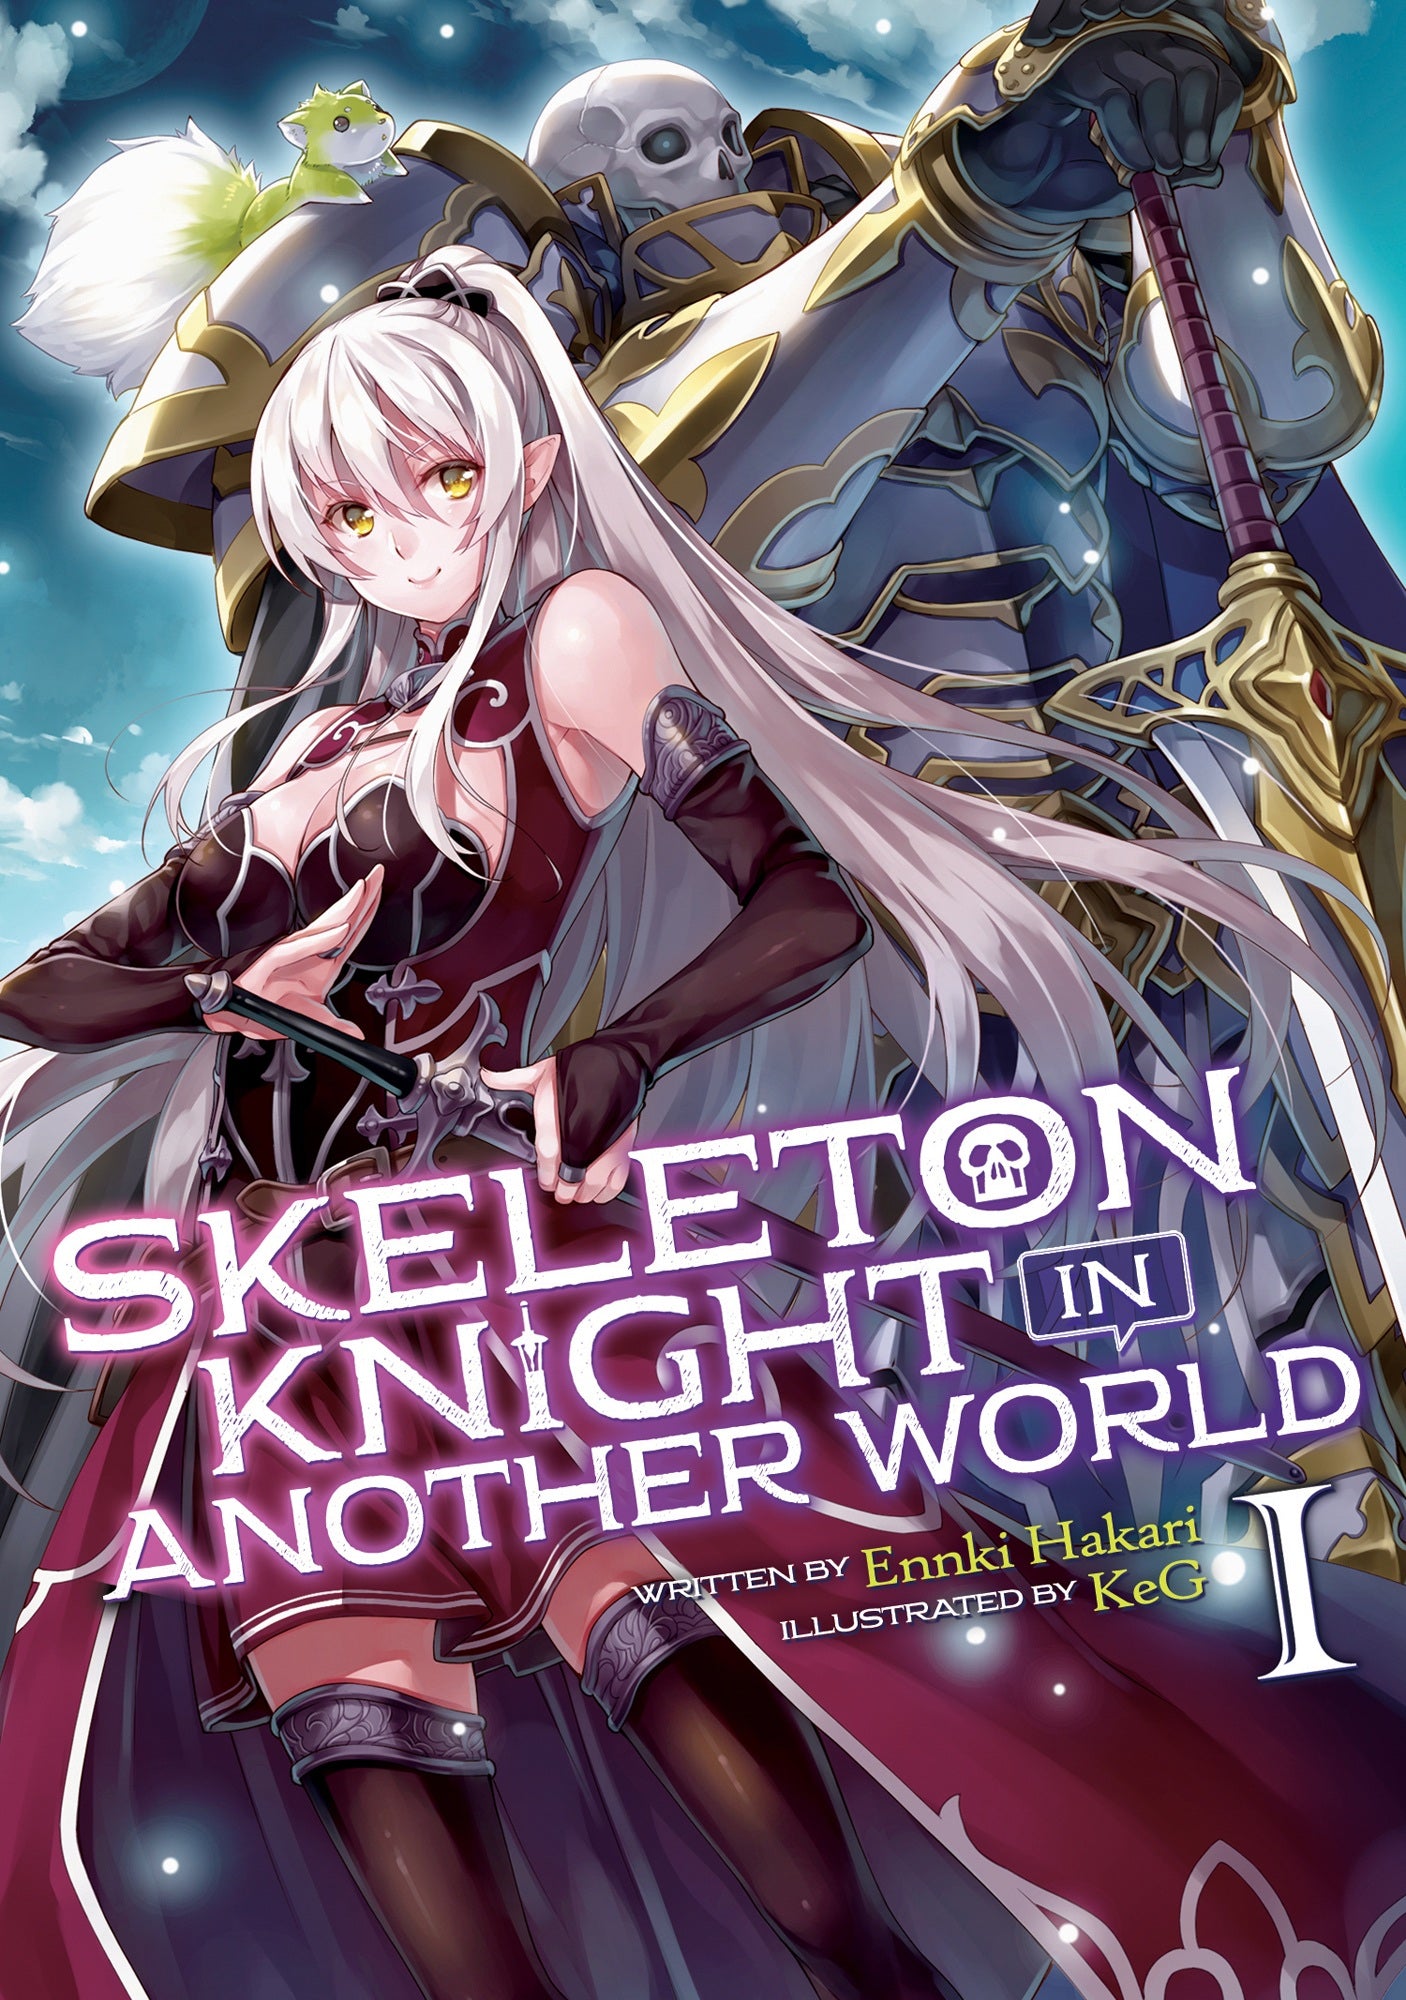 Skeleton Knight in Another World (Light Novel) Vol. 01 (Out of Stock Indefinitely)